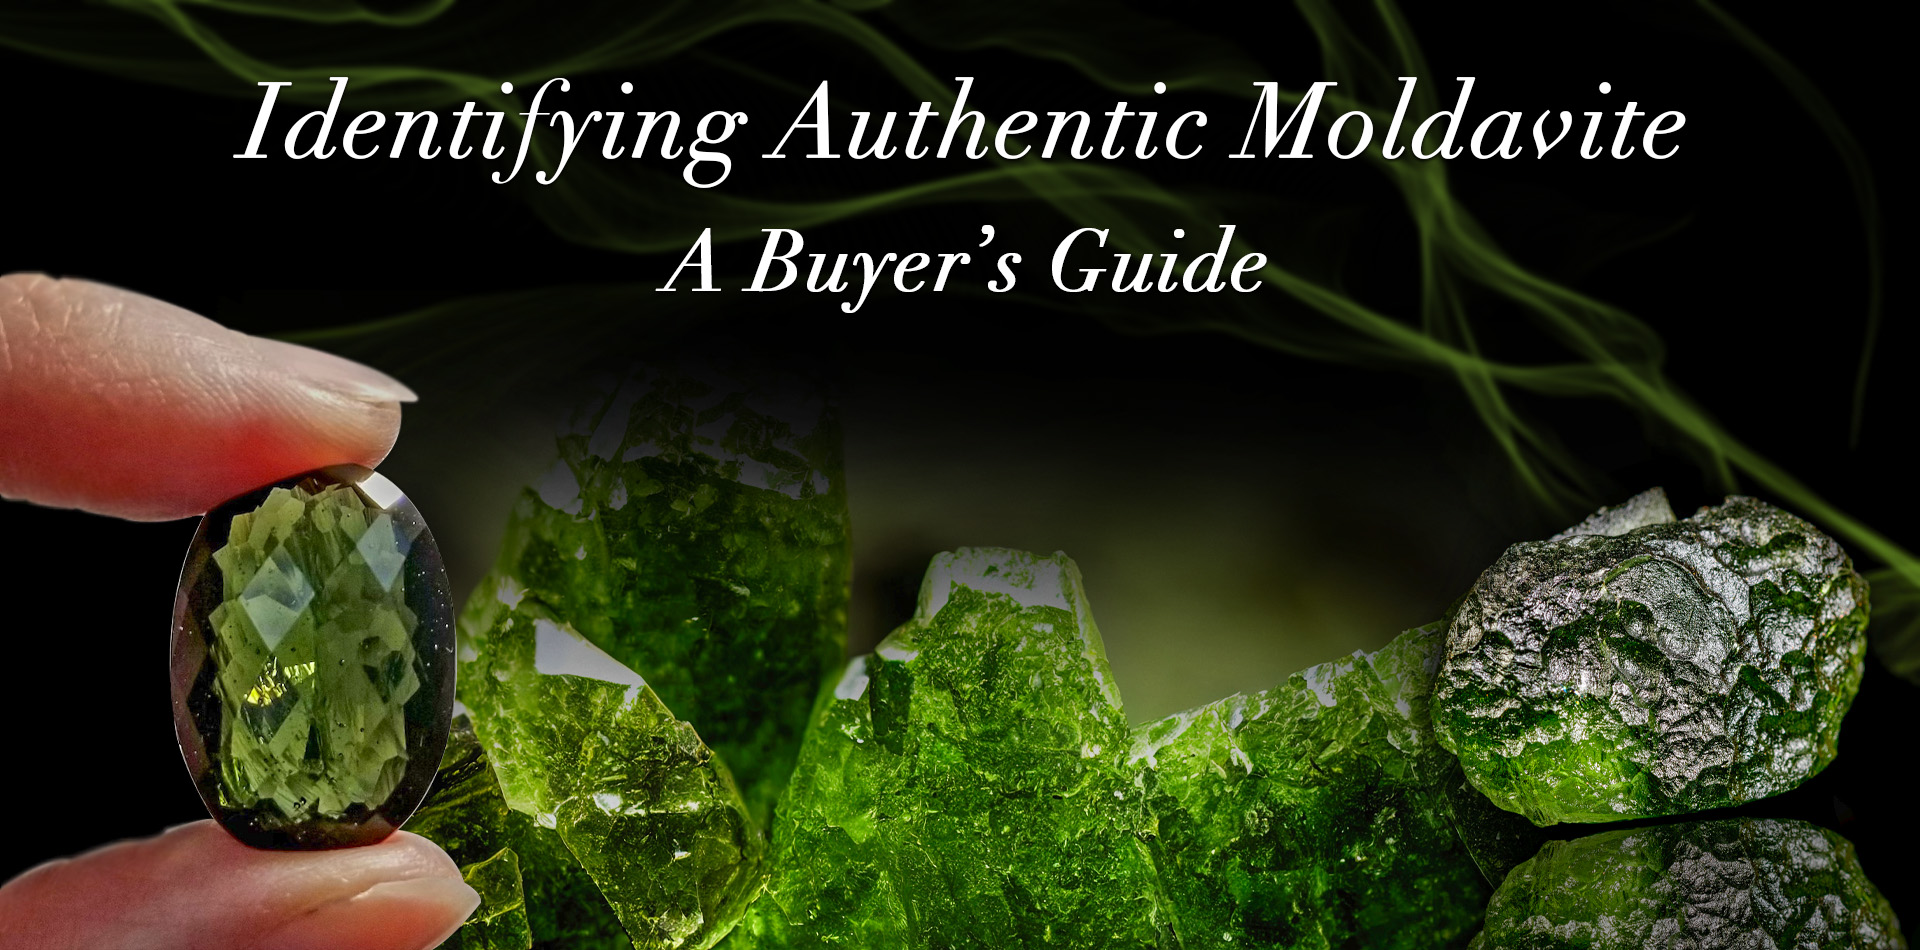 Identifying Authentic Moldavite: A Buyer’s Guide